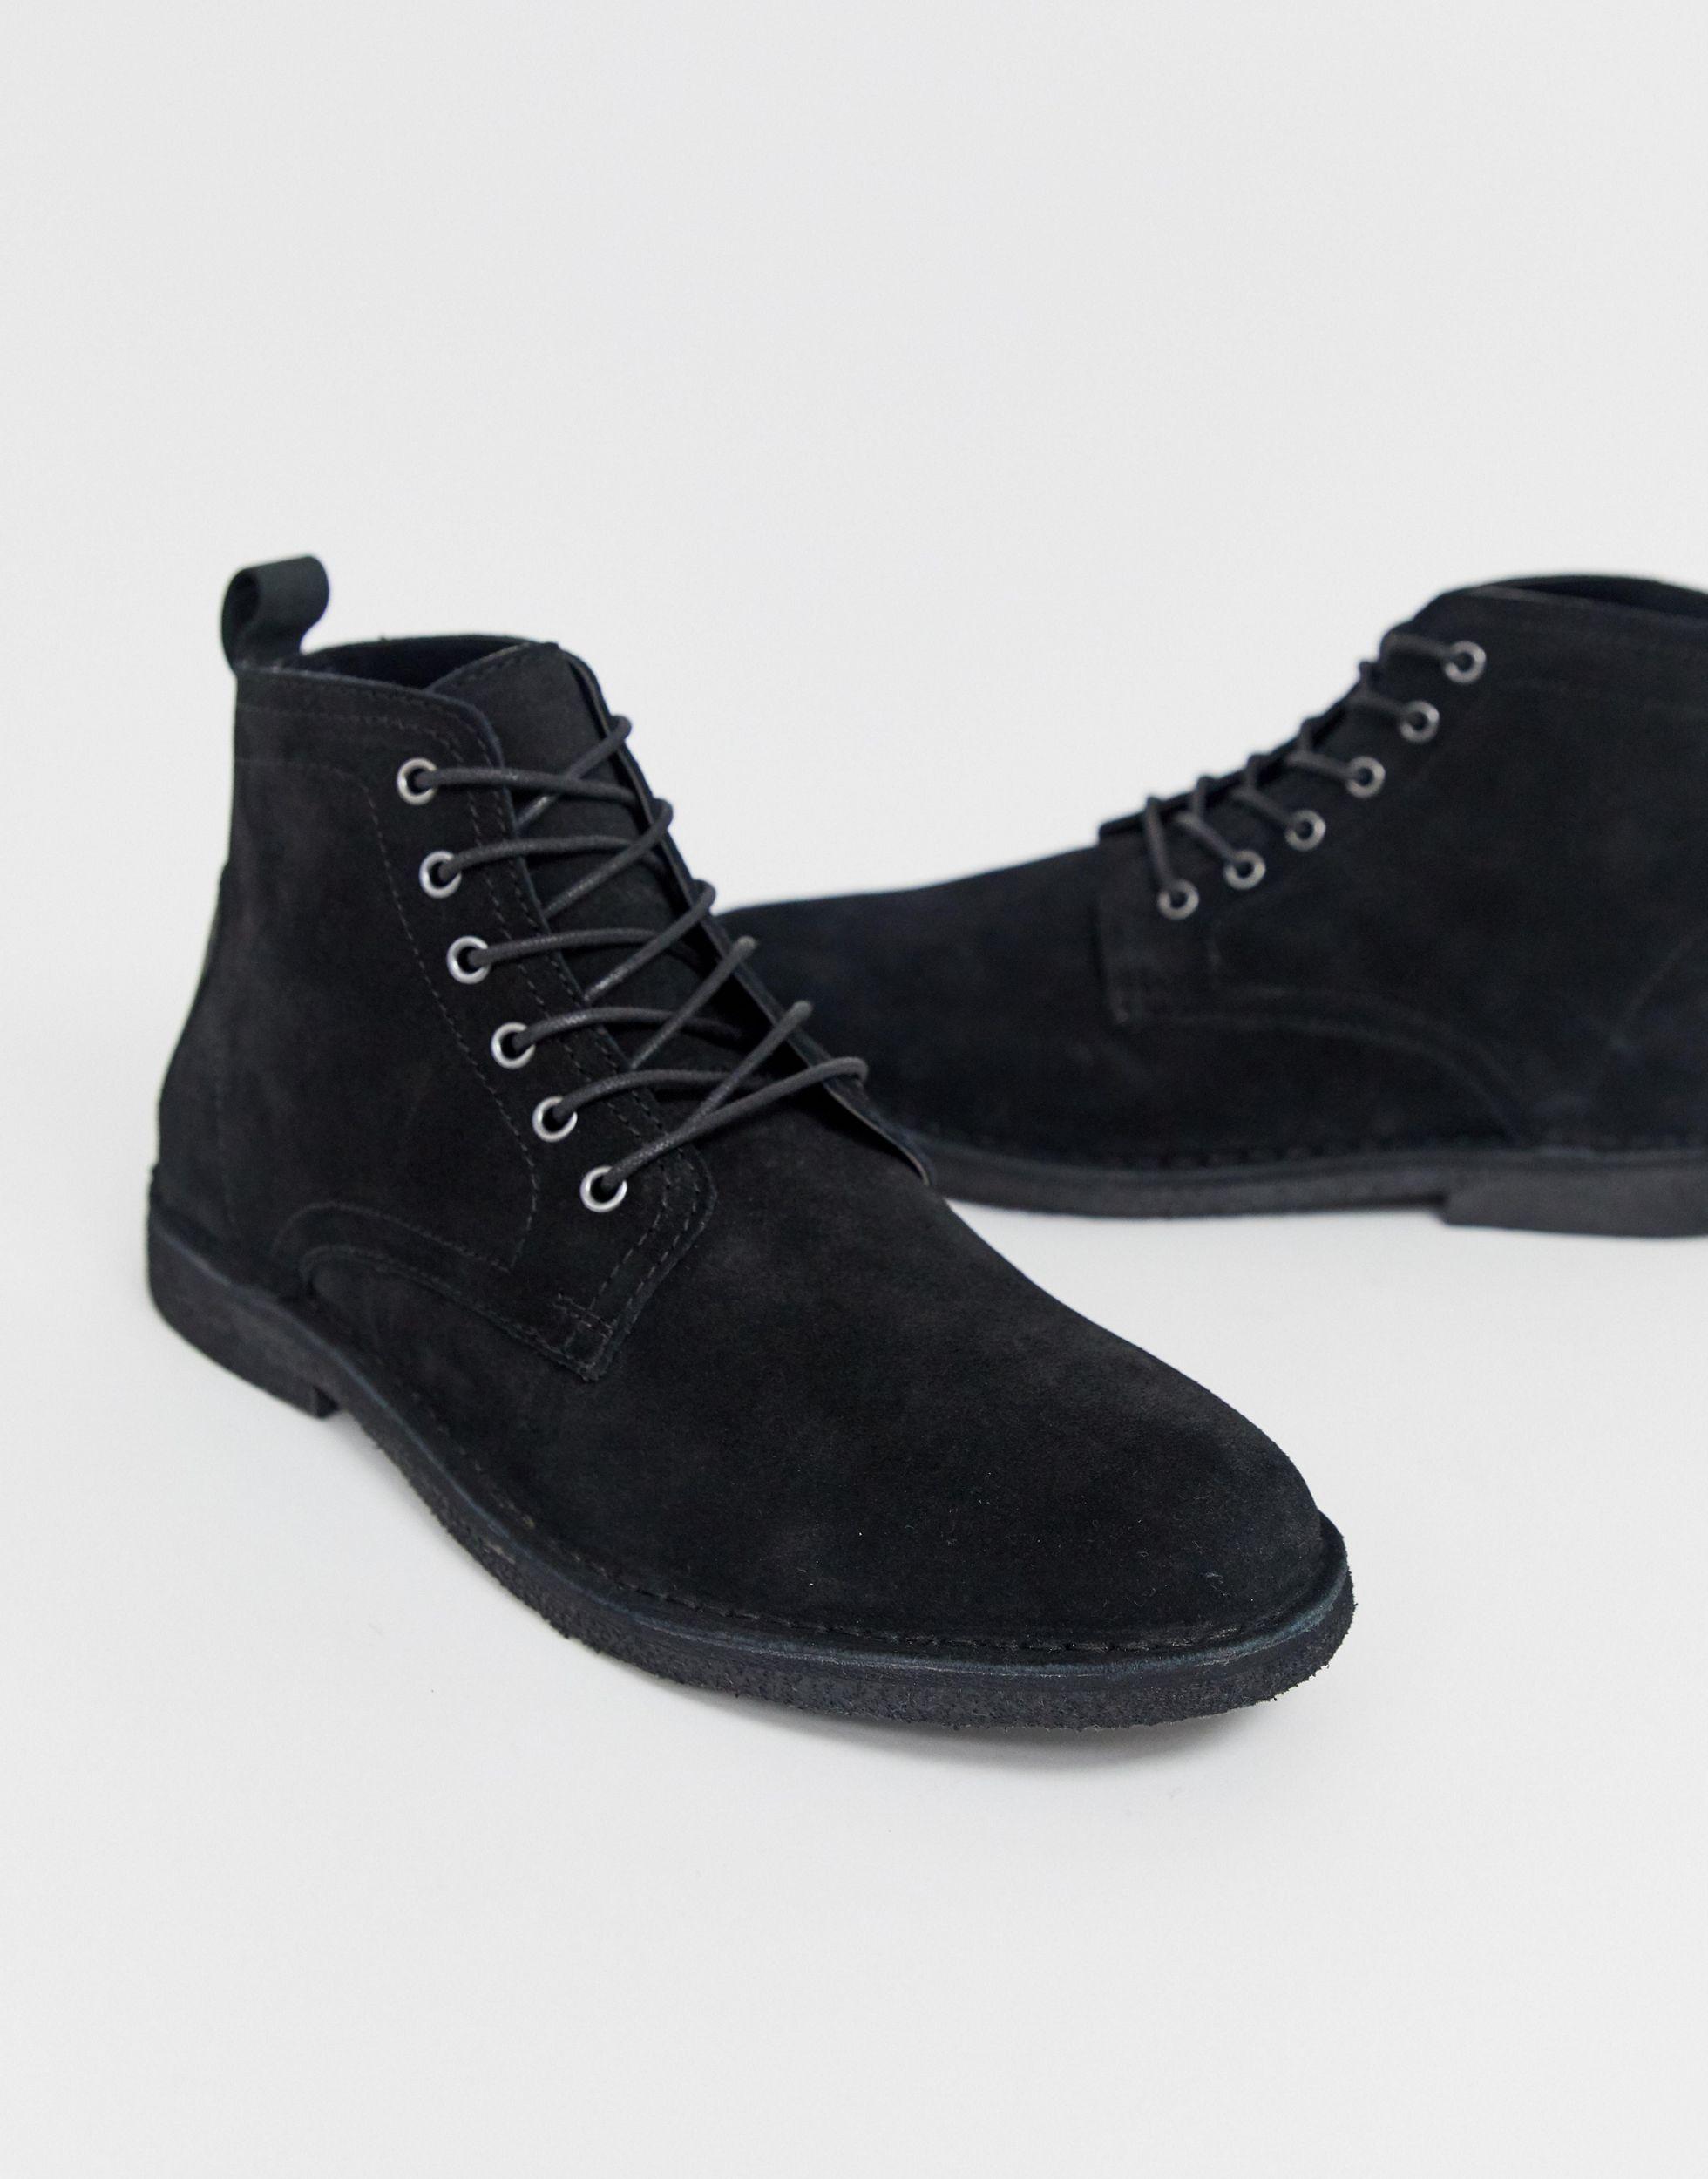 ASOS Suede Wide Fit Desert Chukka Boots in Black for Men - Lyst